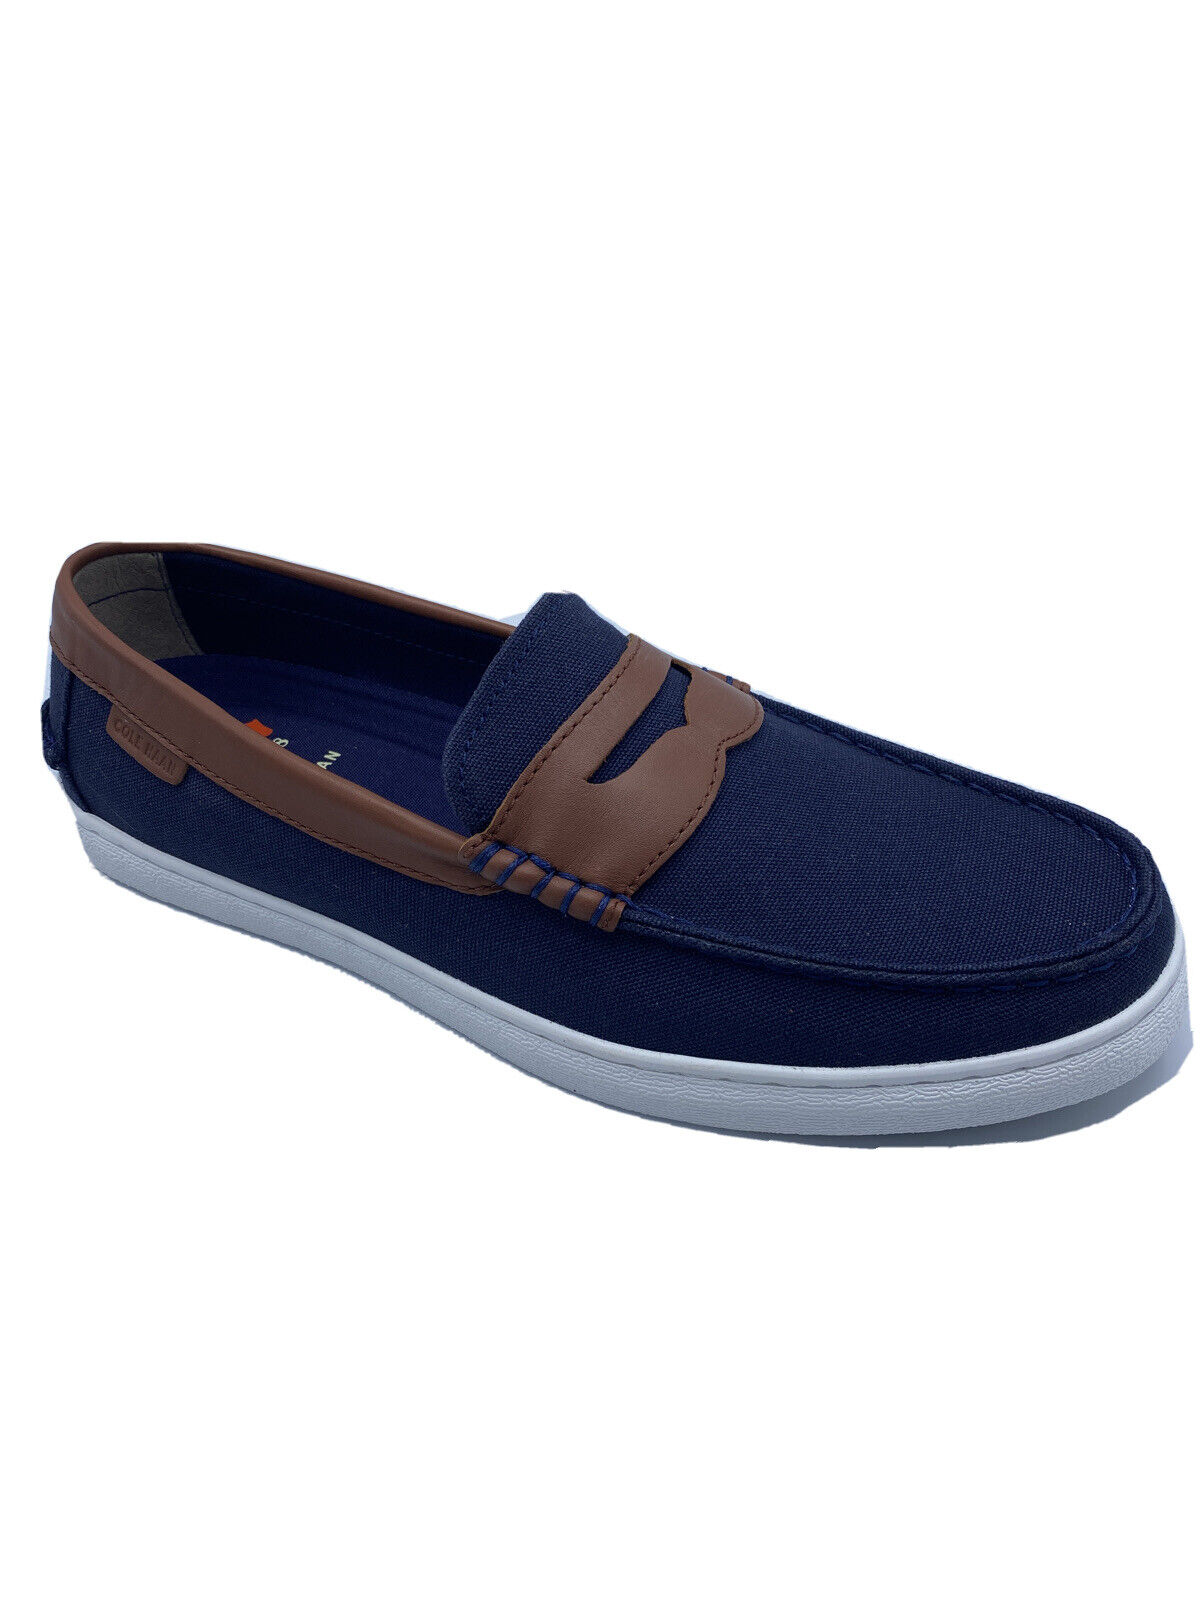 Brand New In High quality Box-Cole Haan Nantucket II Blazer Loafer Blue Si Arlington Mall in